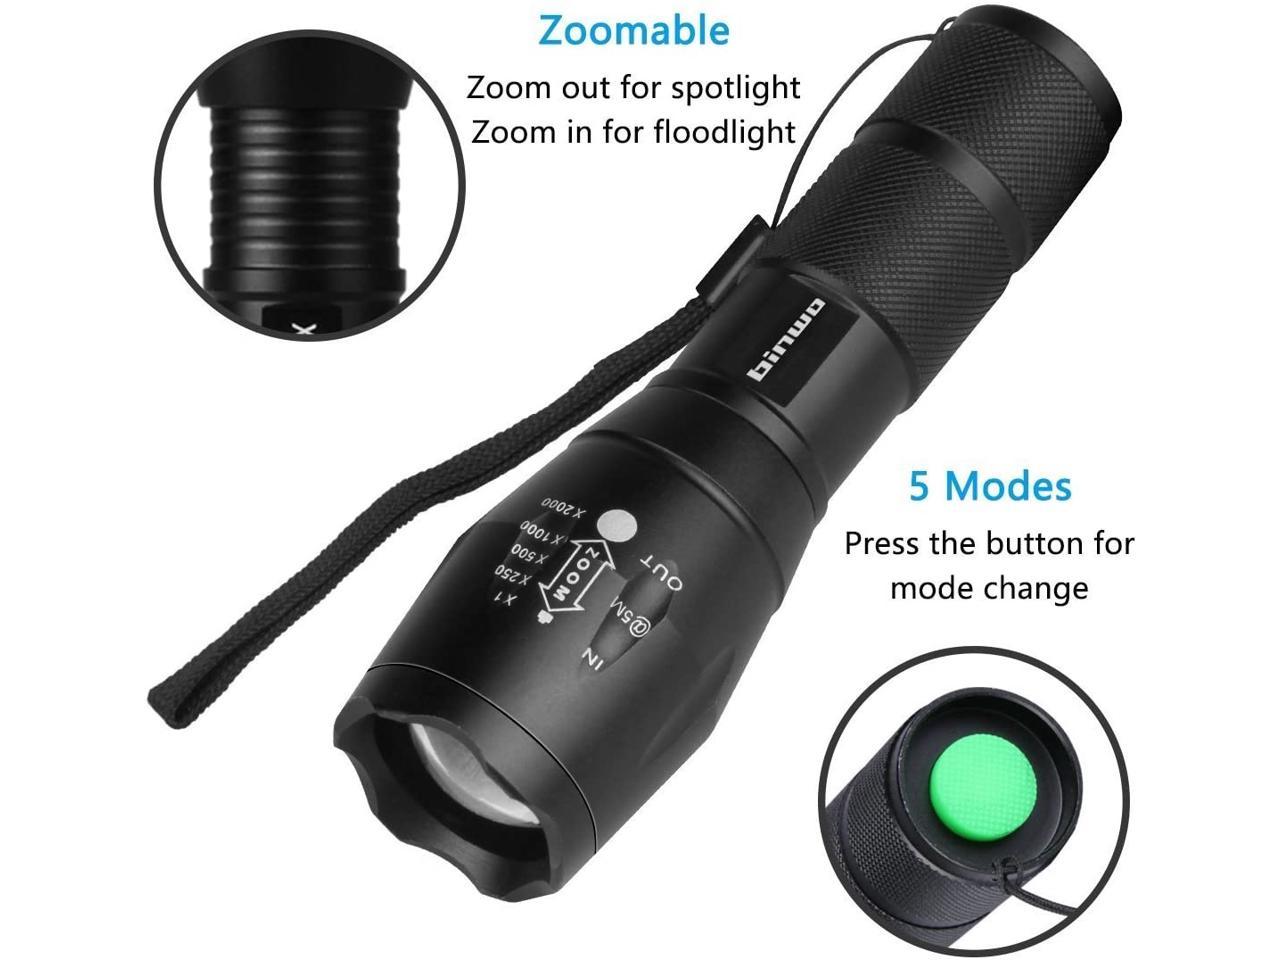 Super Bright 2000 Lumen XML T6 LED Flashlights Portable Outdoor Water Resistant Torch Light Zoomable Flashlight with 5 Light Modes Binwo Flashlights 